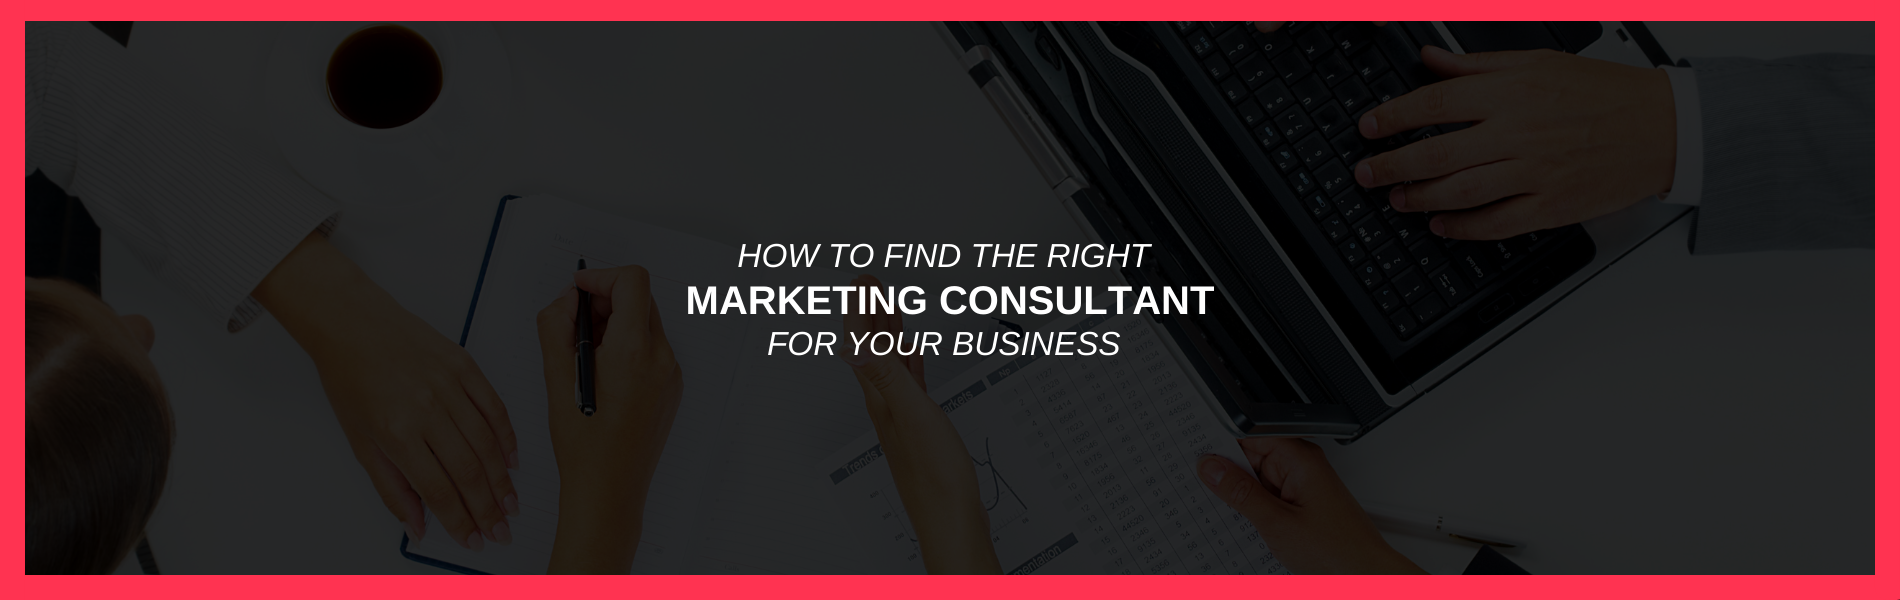 Finding the right marketing consultant takes time, so don't rush to immediately fill the role.